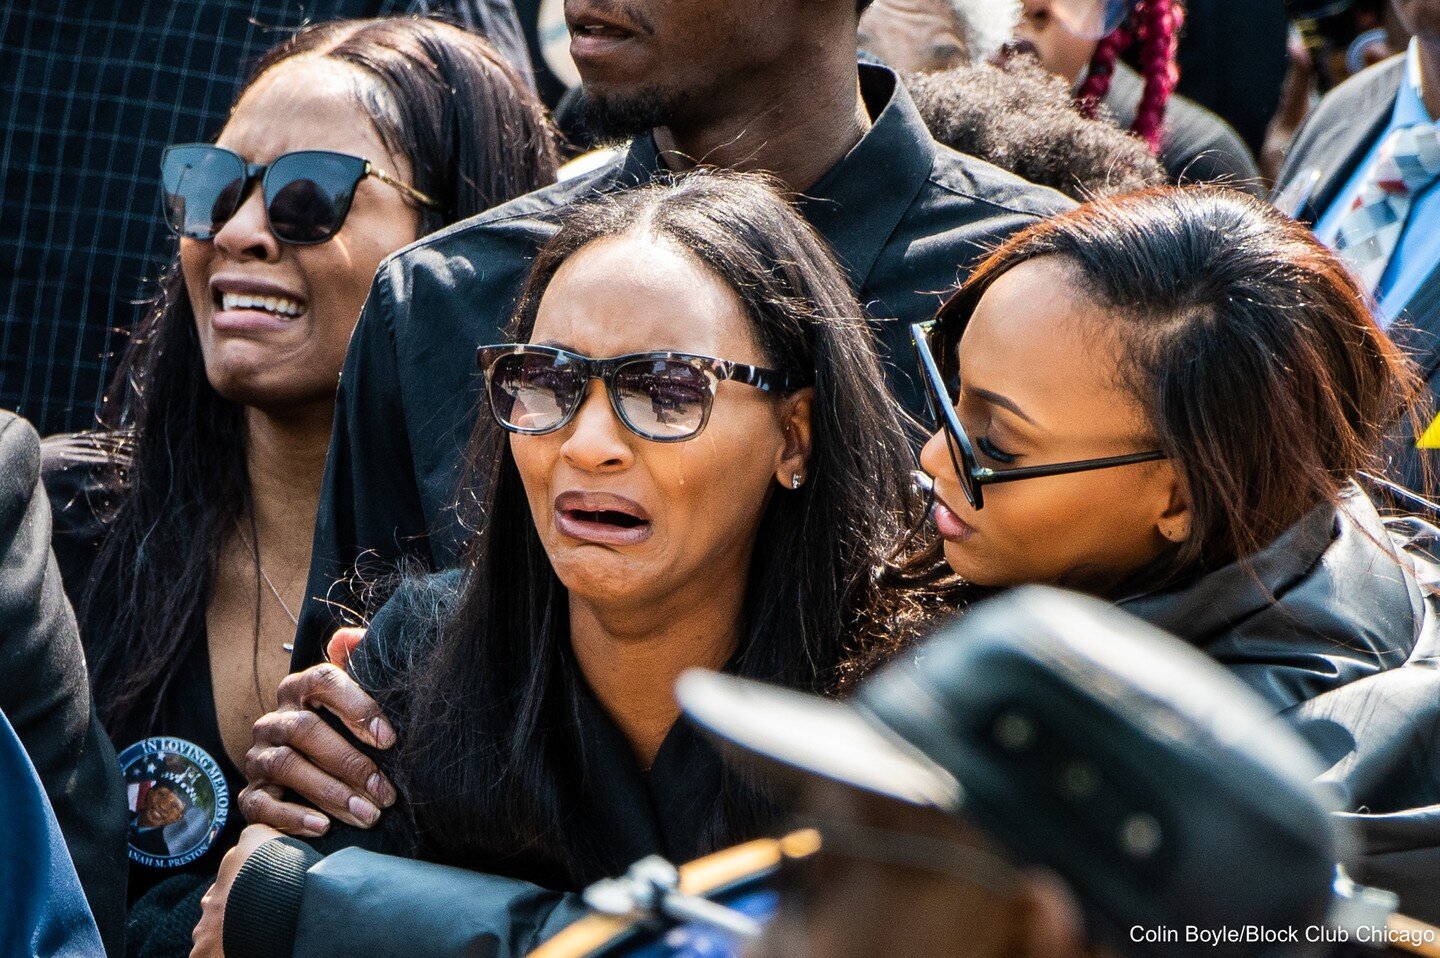 The cries and yells from the family of slain Chicago Police Officer Ar&eacute;anah Preston, 24, will probably haunt me for quite some time... This was one of the most painful stories I've covered, and my heart hurts so much for Ms. Preston and her lo